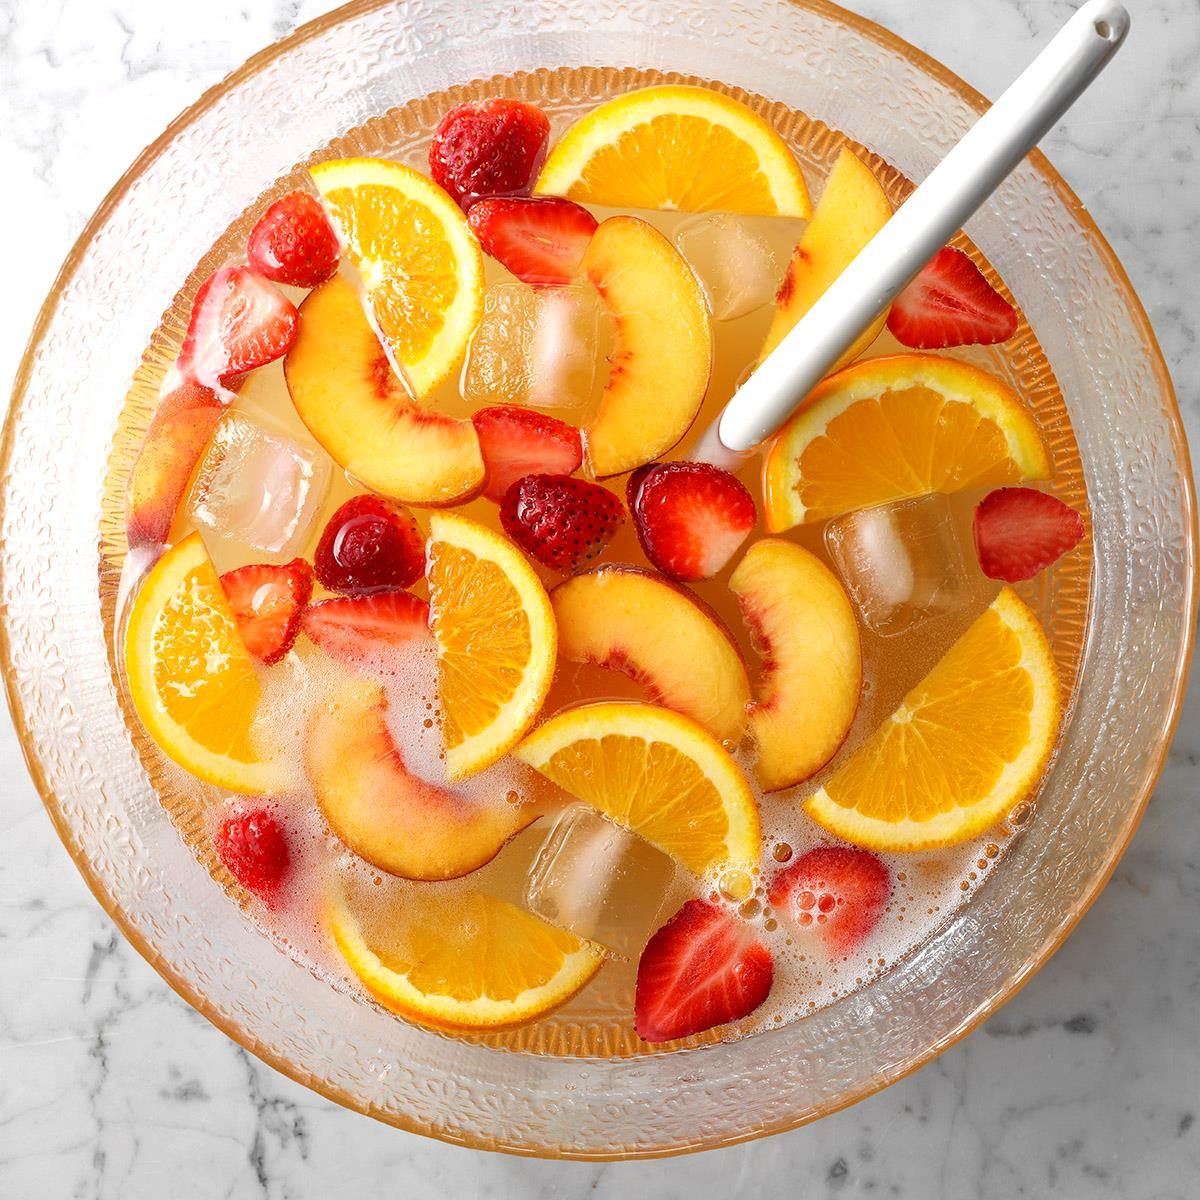 ❄️Recipe here👇🏻☃️ . . . Save this punch recipe for your next